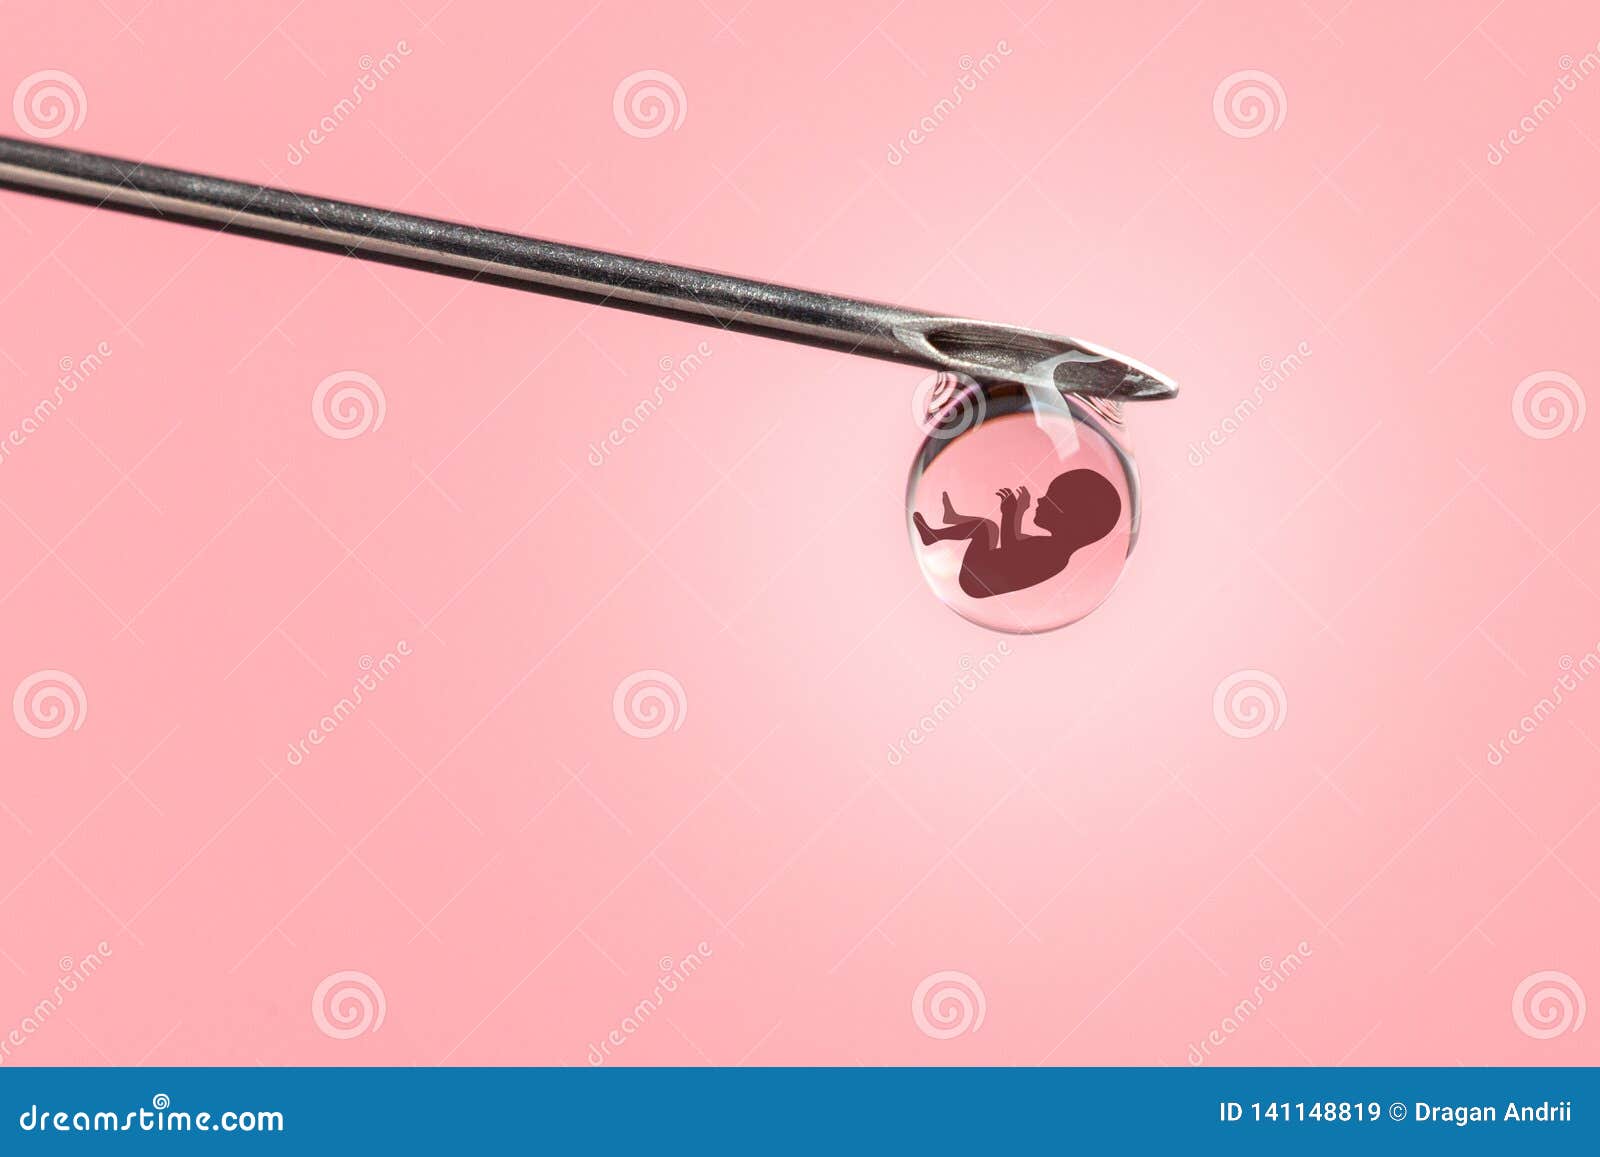 artificial insemination. test tube baby, ivf. on the tip of the needle drop of syringe with the silhouette of baby embryo.